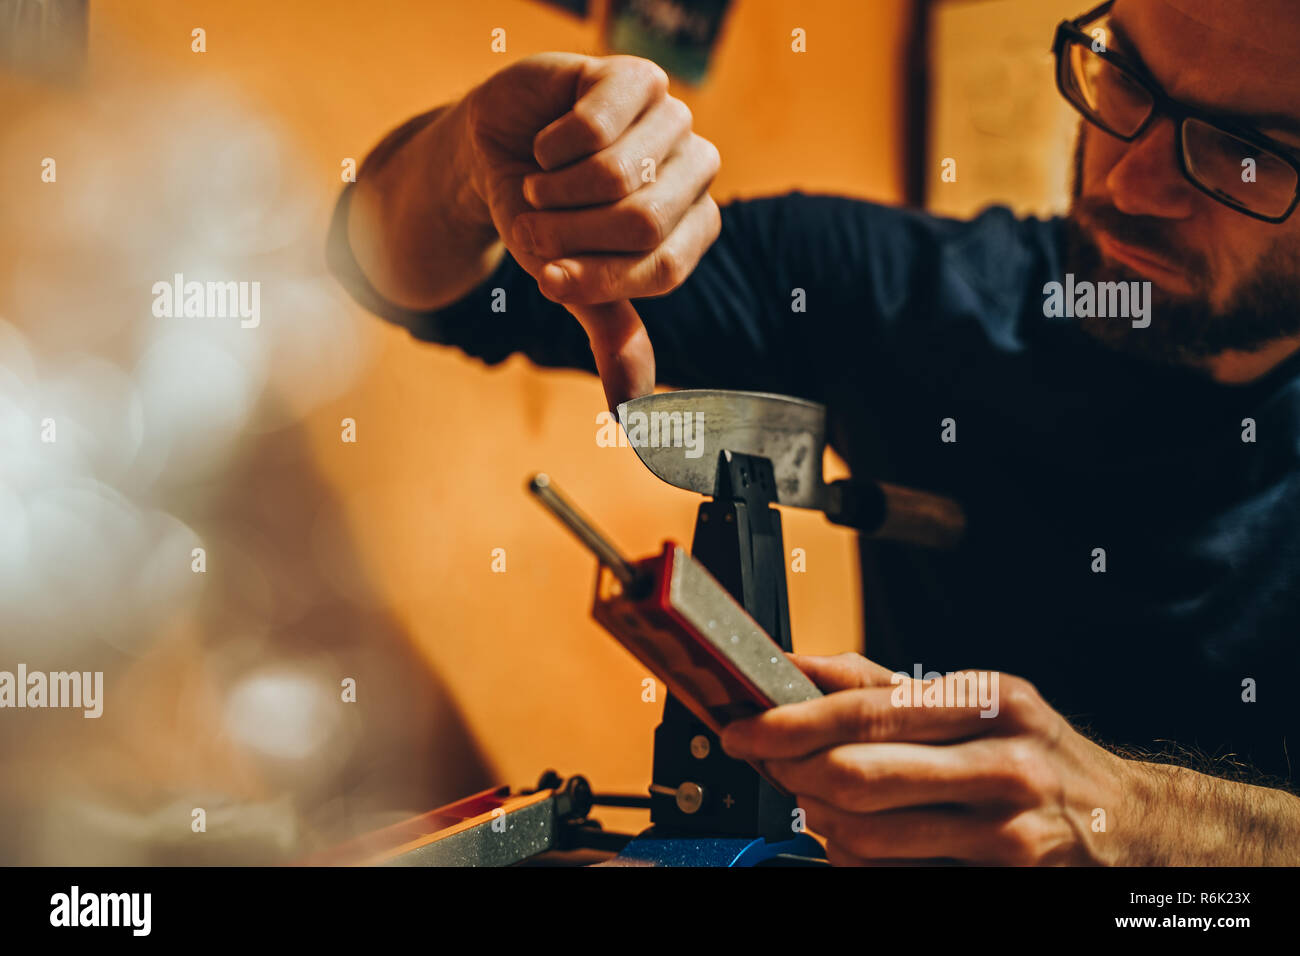 https://c8.alamy.com/comp/R6K23X/caucasian-man-is-checking-the-sharpness-of-a-japanese-kitchen-knife-after-sharpening-it-with-a-modern-whetstone-device-R6K23X.jpg